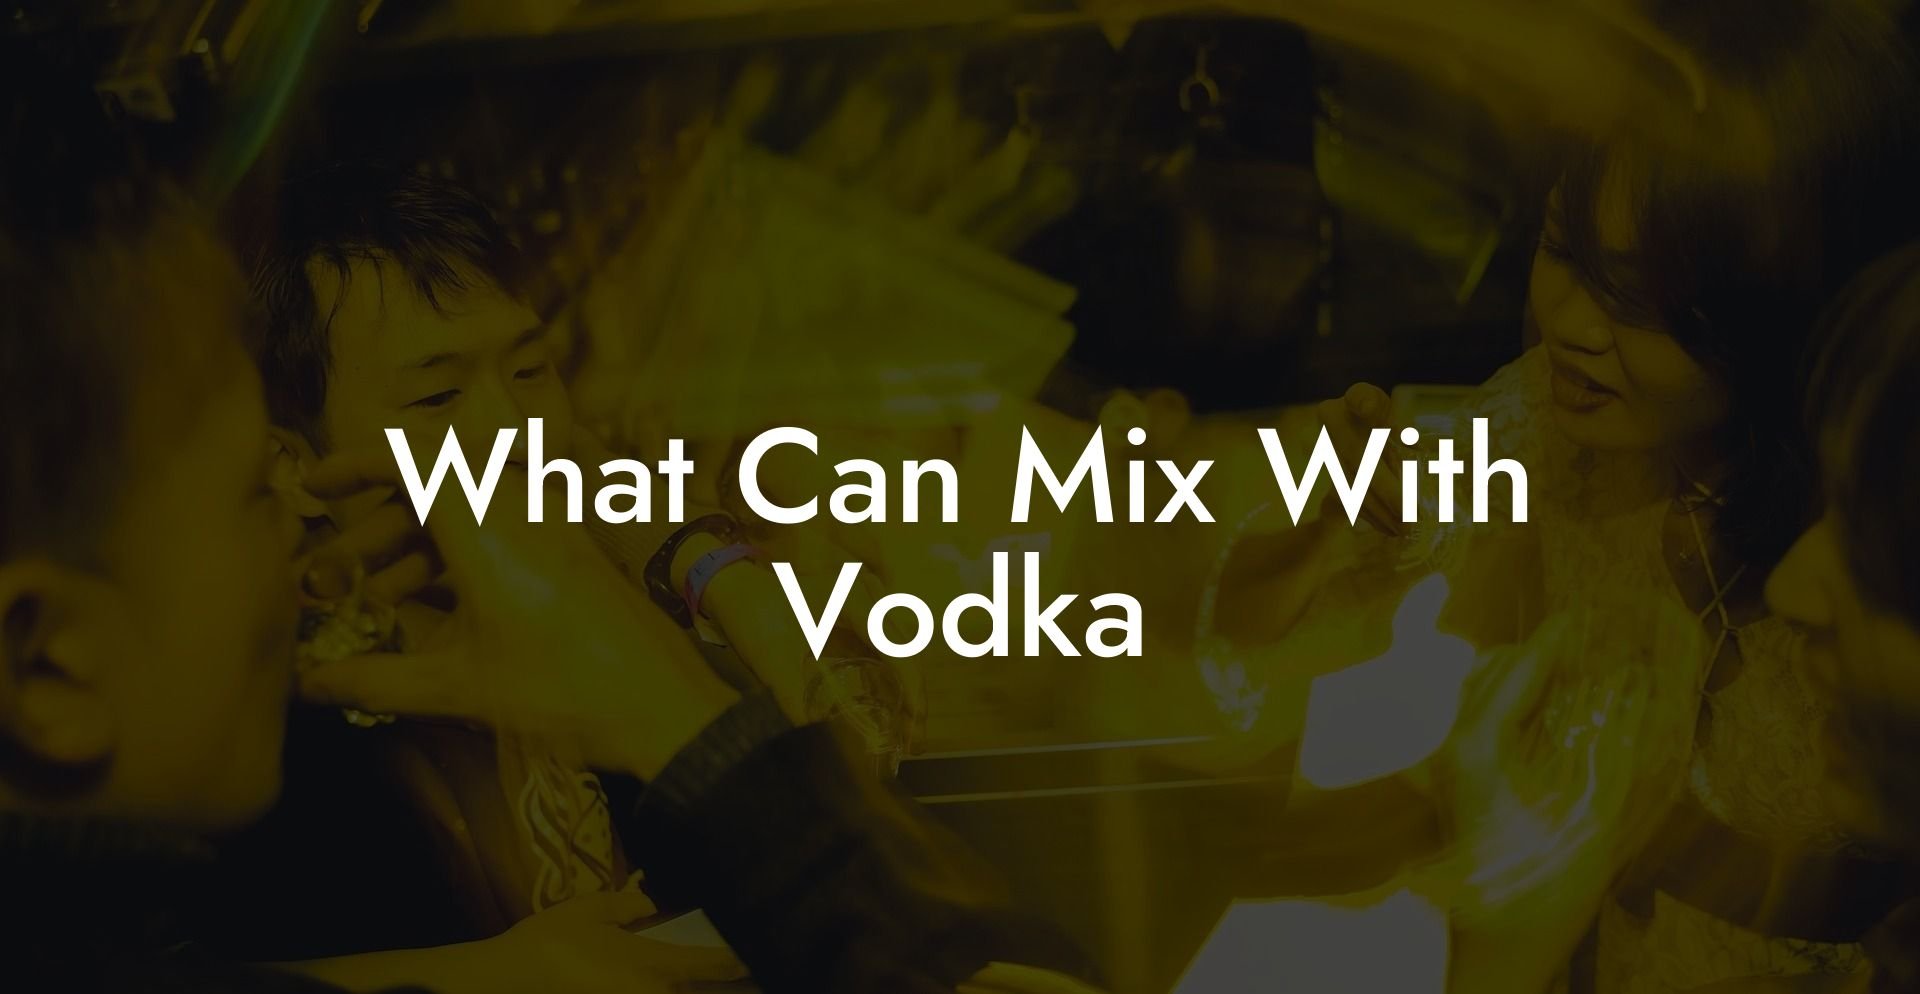 What Can Mix With Vodka